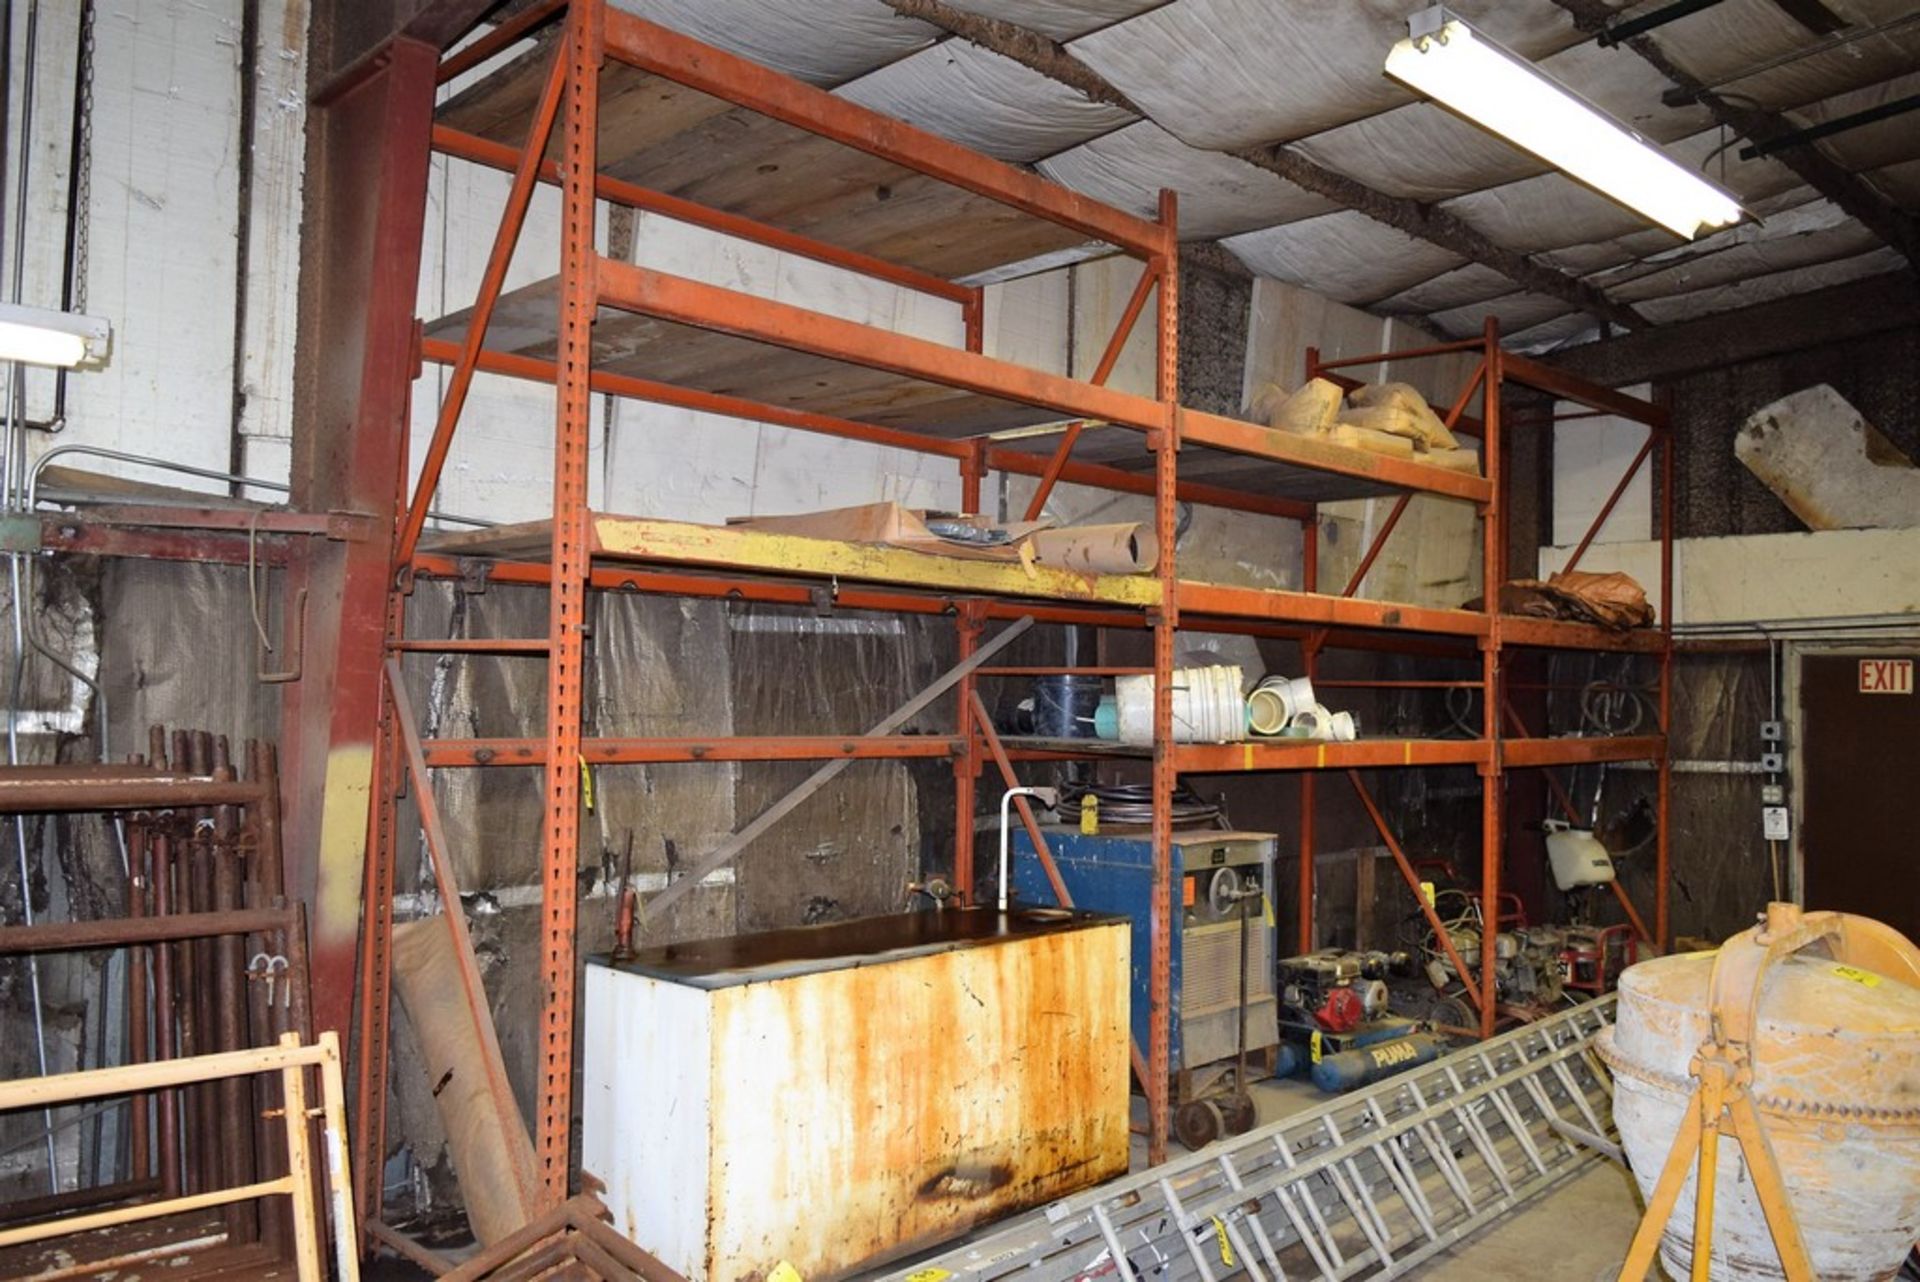 SECTIONS OF PALLET RACK 8' X 12' X 42" CONSISTING OF FOUR 12' UPRIGHTS, EIGHTEEN 8' CROSSBEAMS